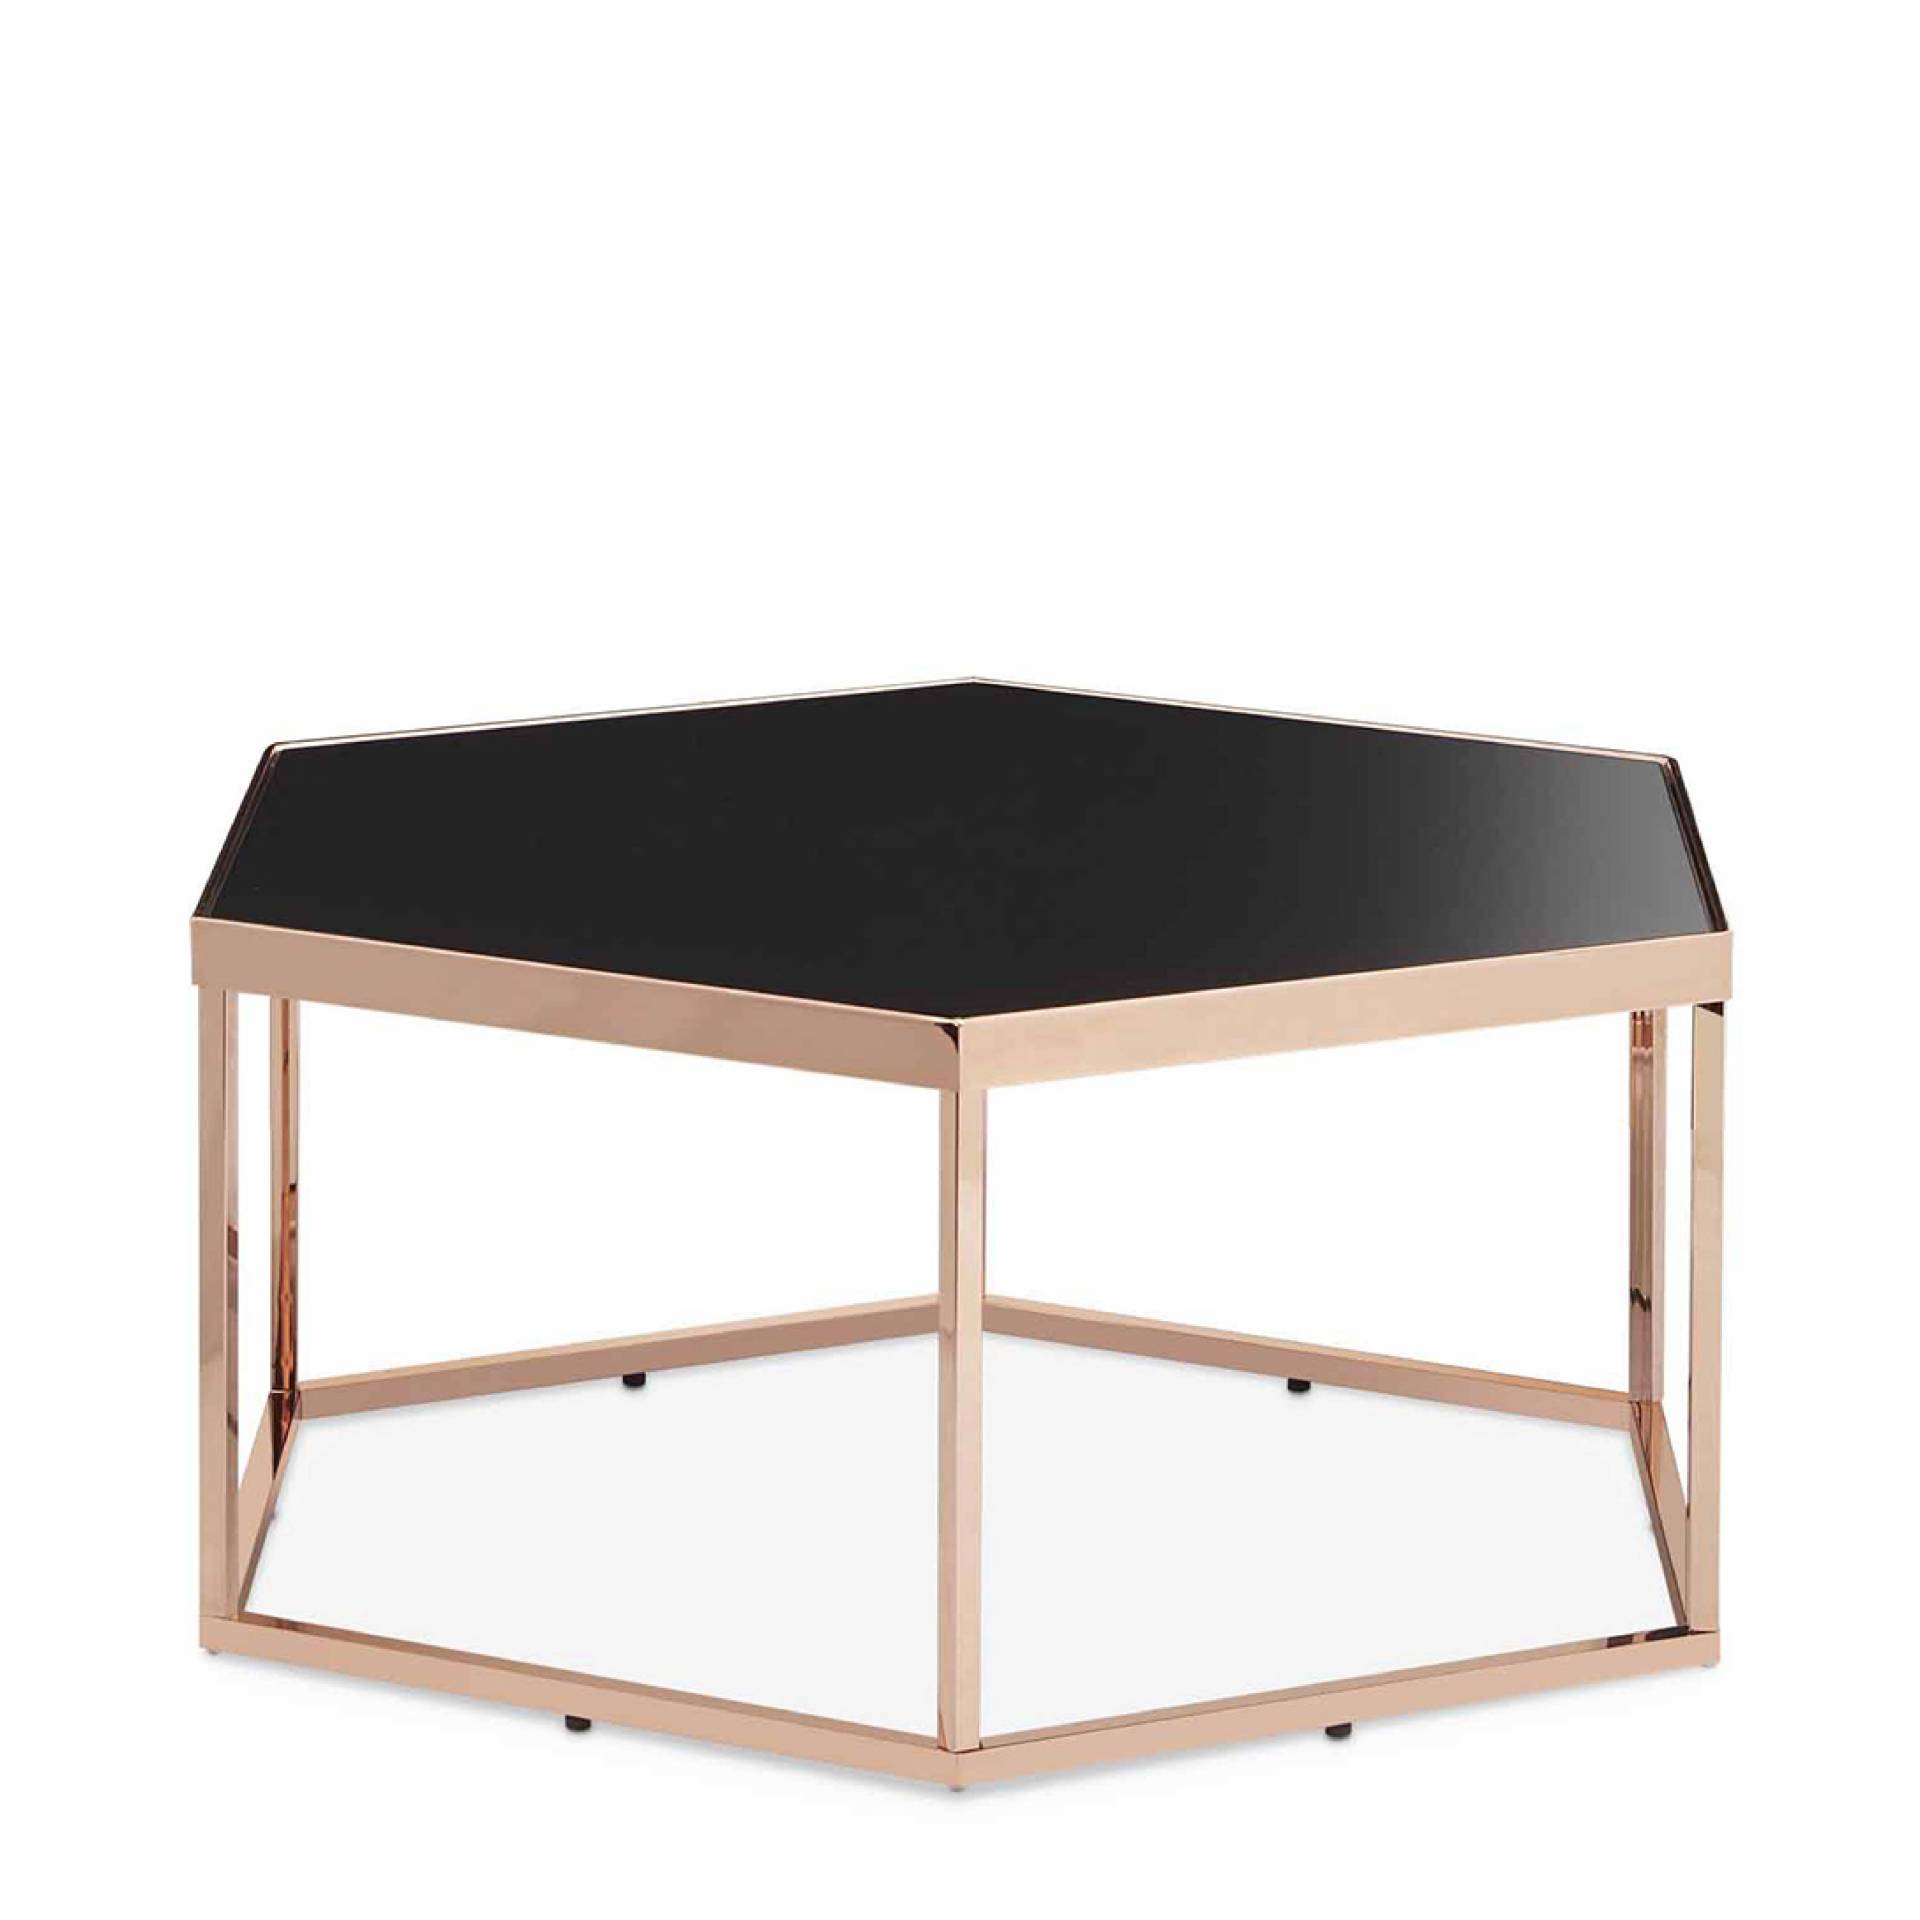 Featured image of post Black Glass Coffee Table Square : Add style to your home, with pieces that add to your decor while providing hidden storage.